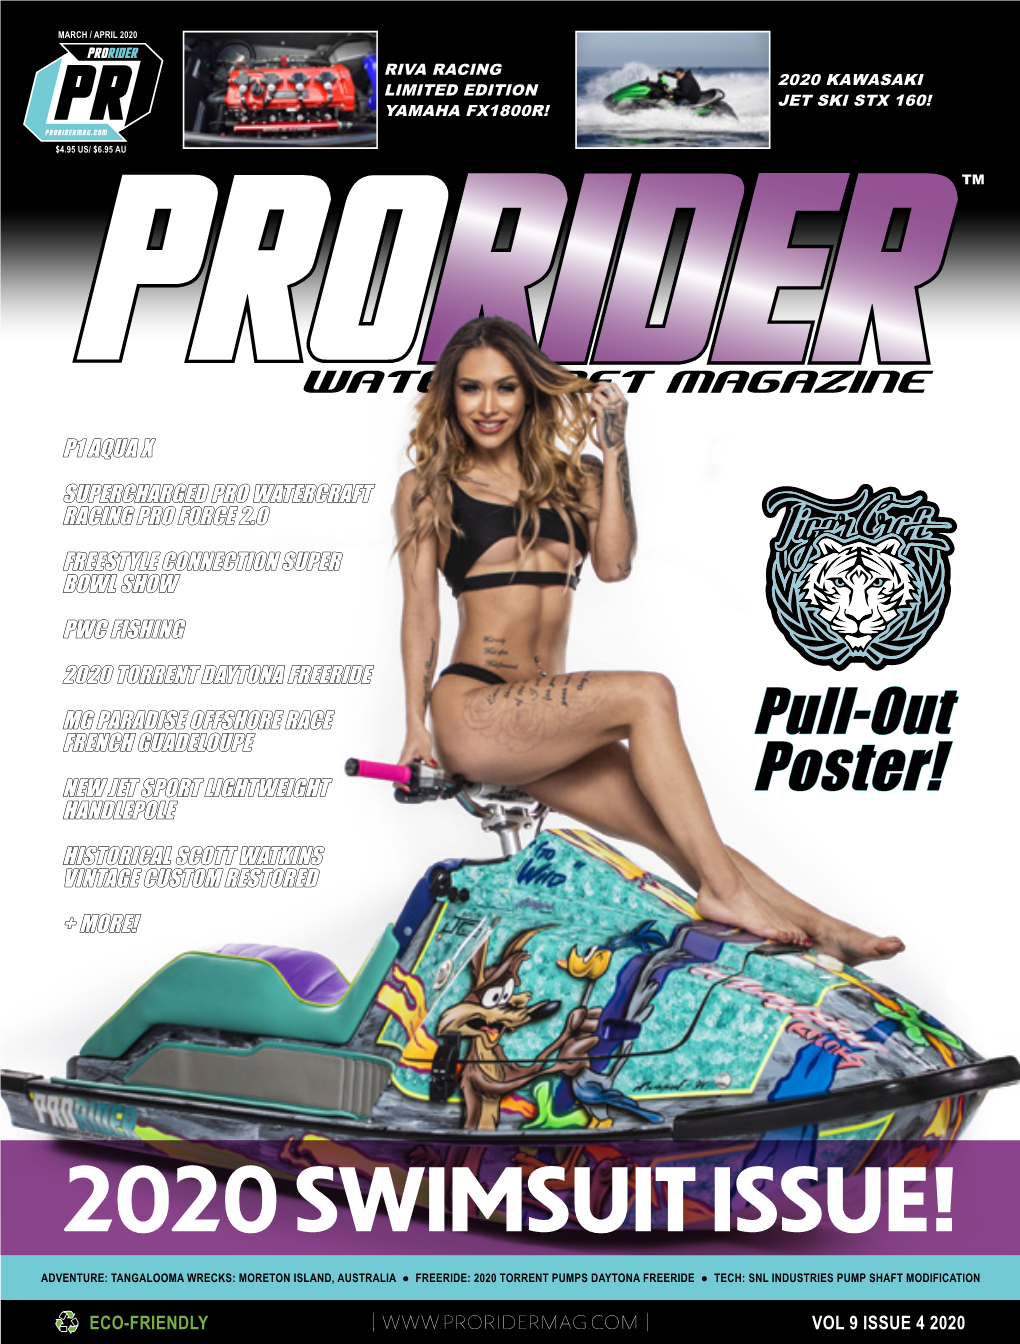 Prorider-March/April-2020 DOWNLOAD NOW!